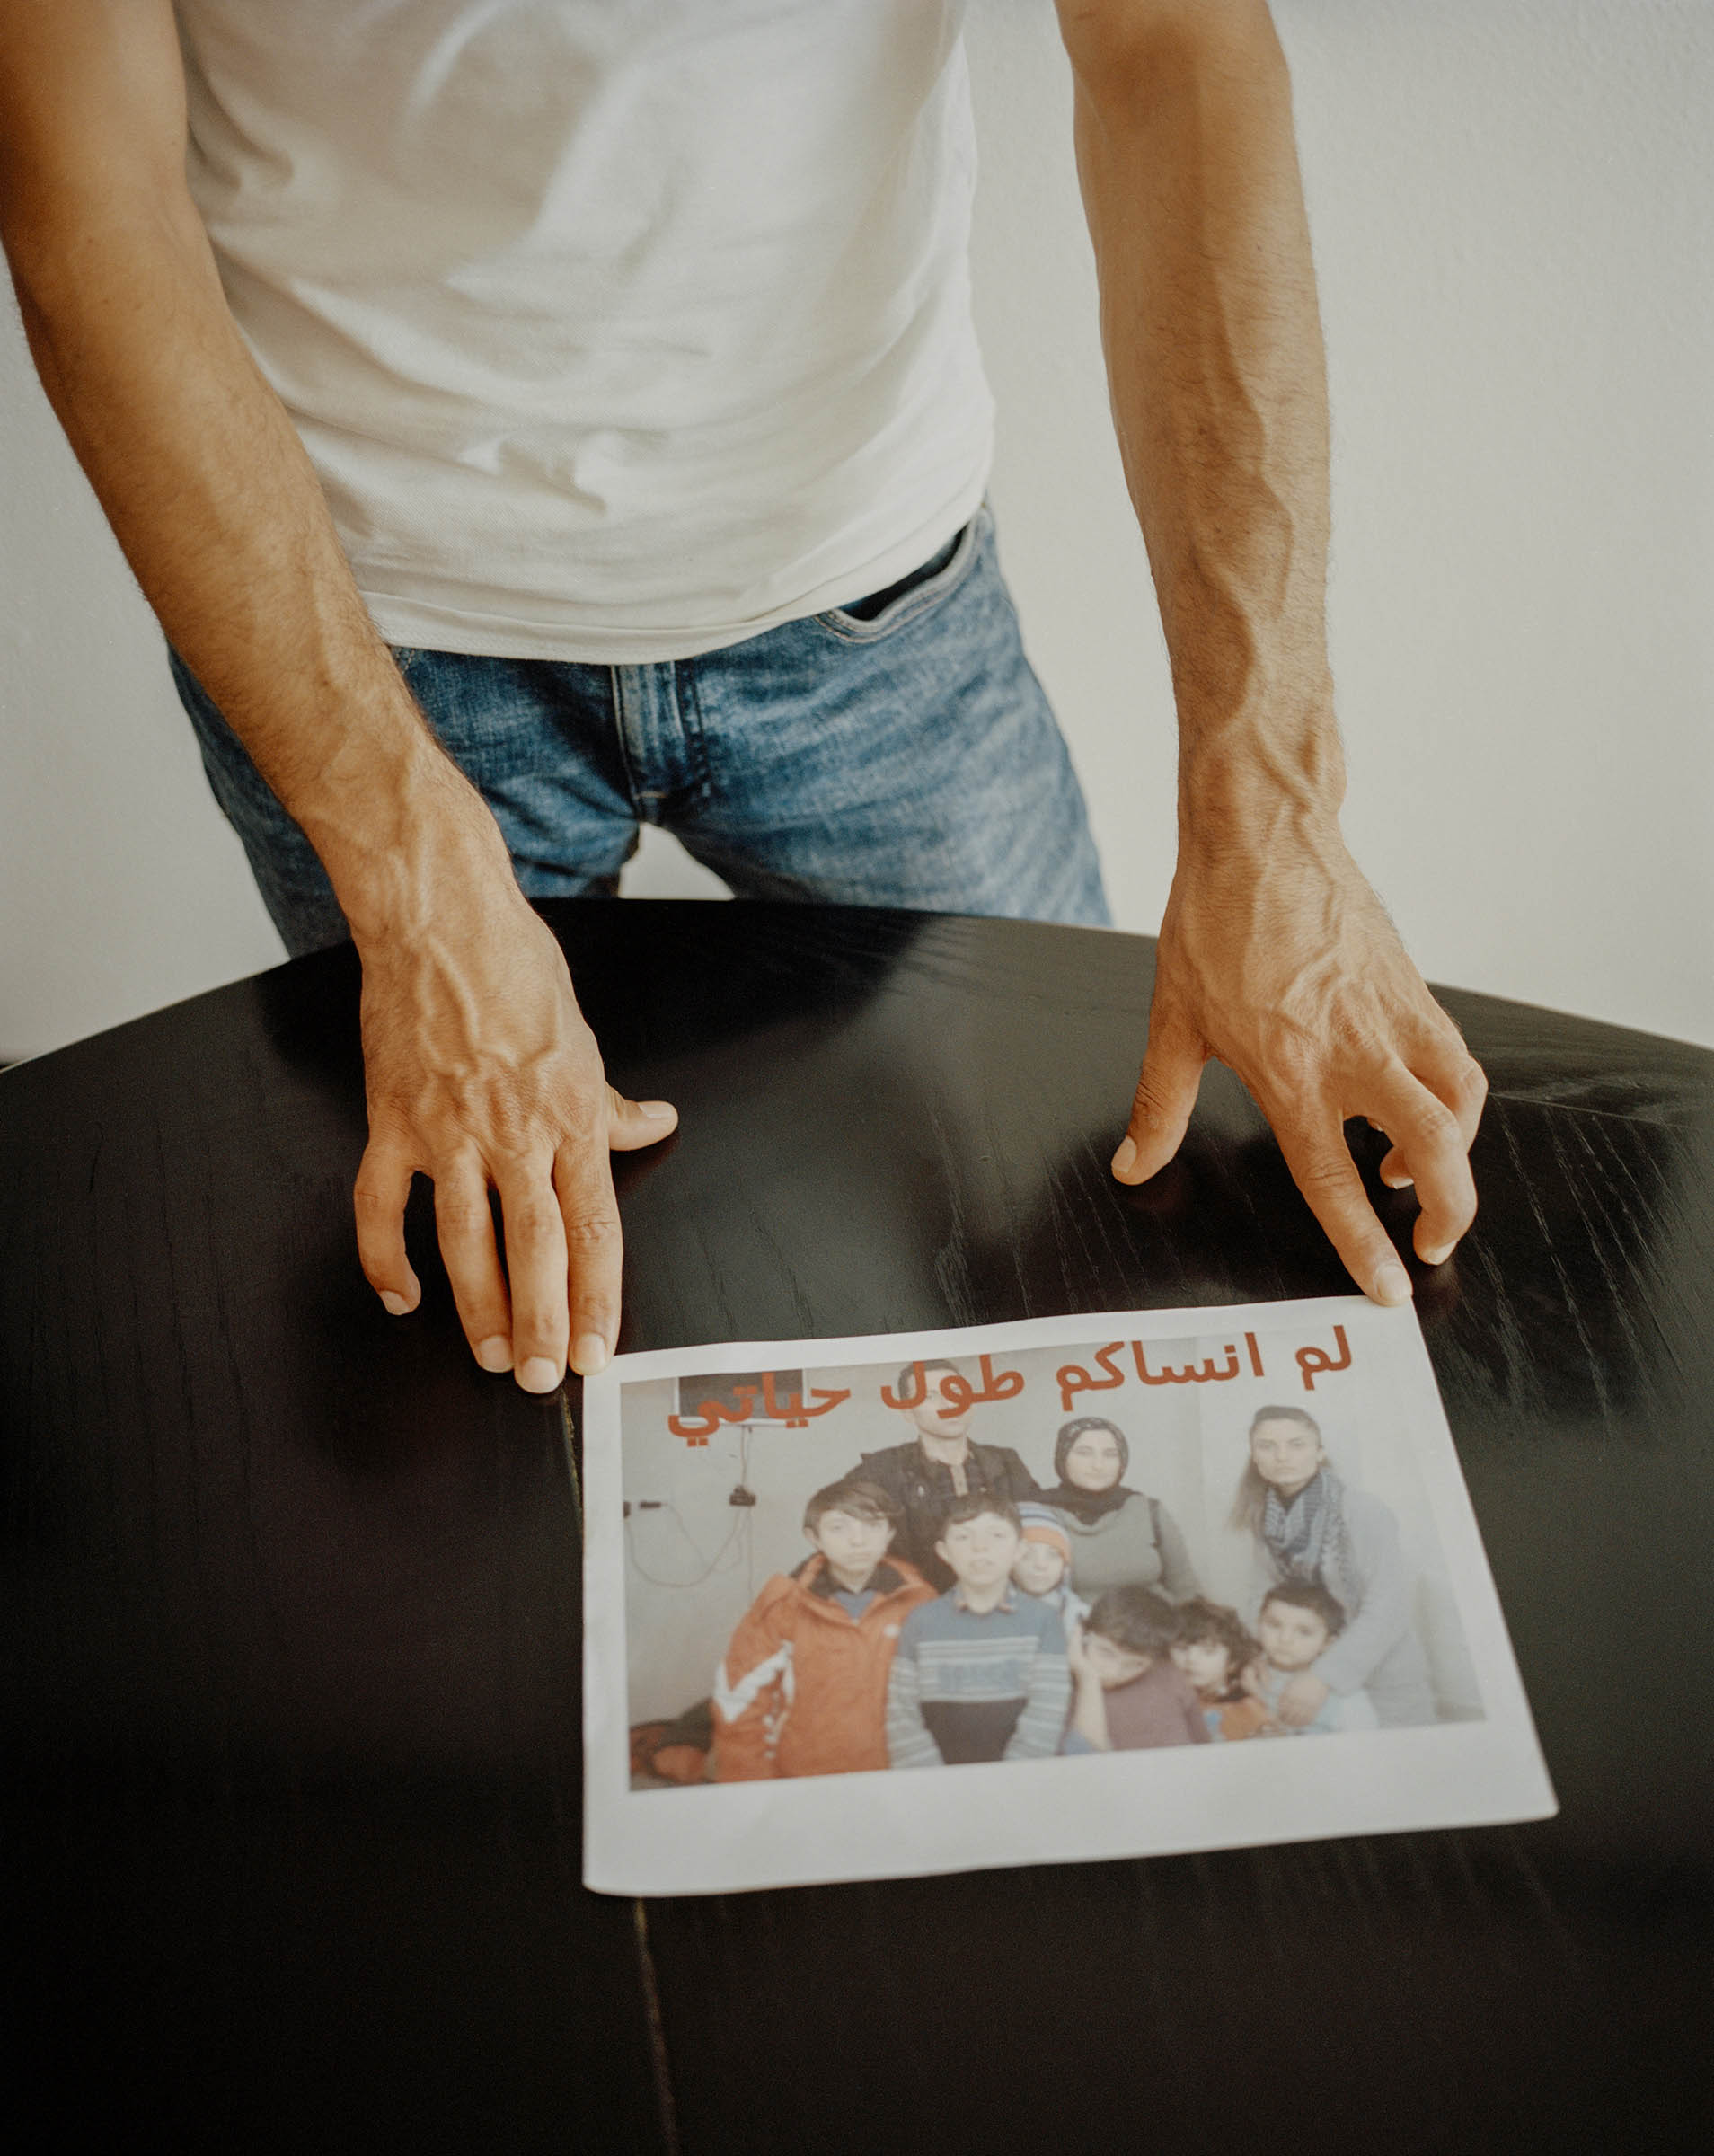 Walid Khalil Murad with his only photograph of his family. He lives in the village Theley in Saarland in southern Germany. Thursday, July 25, 2019.Photograph by Mustafah Abdulaziz